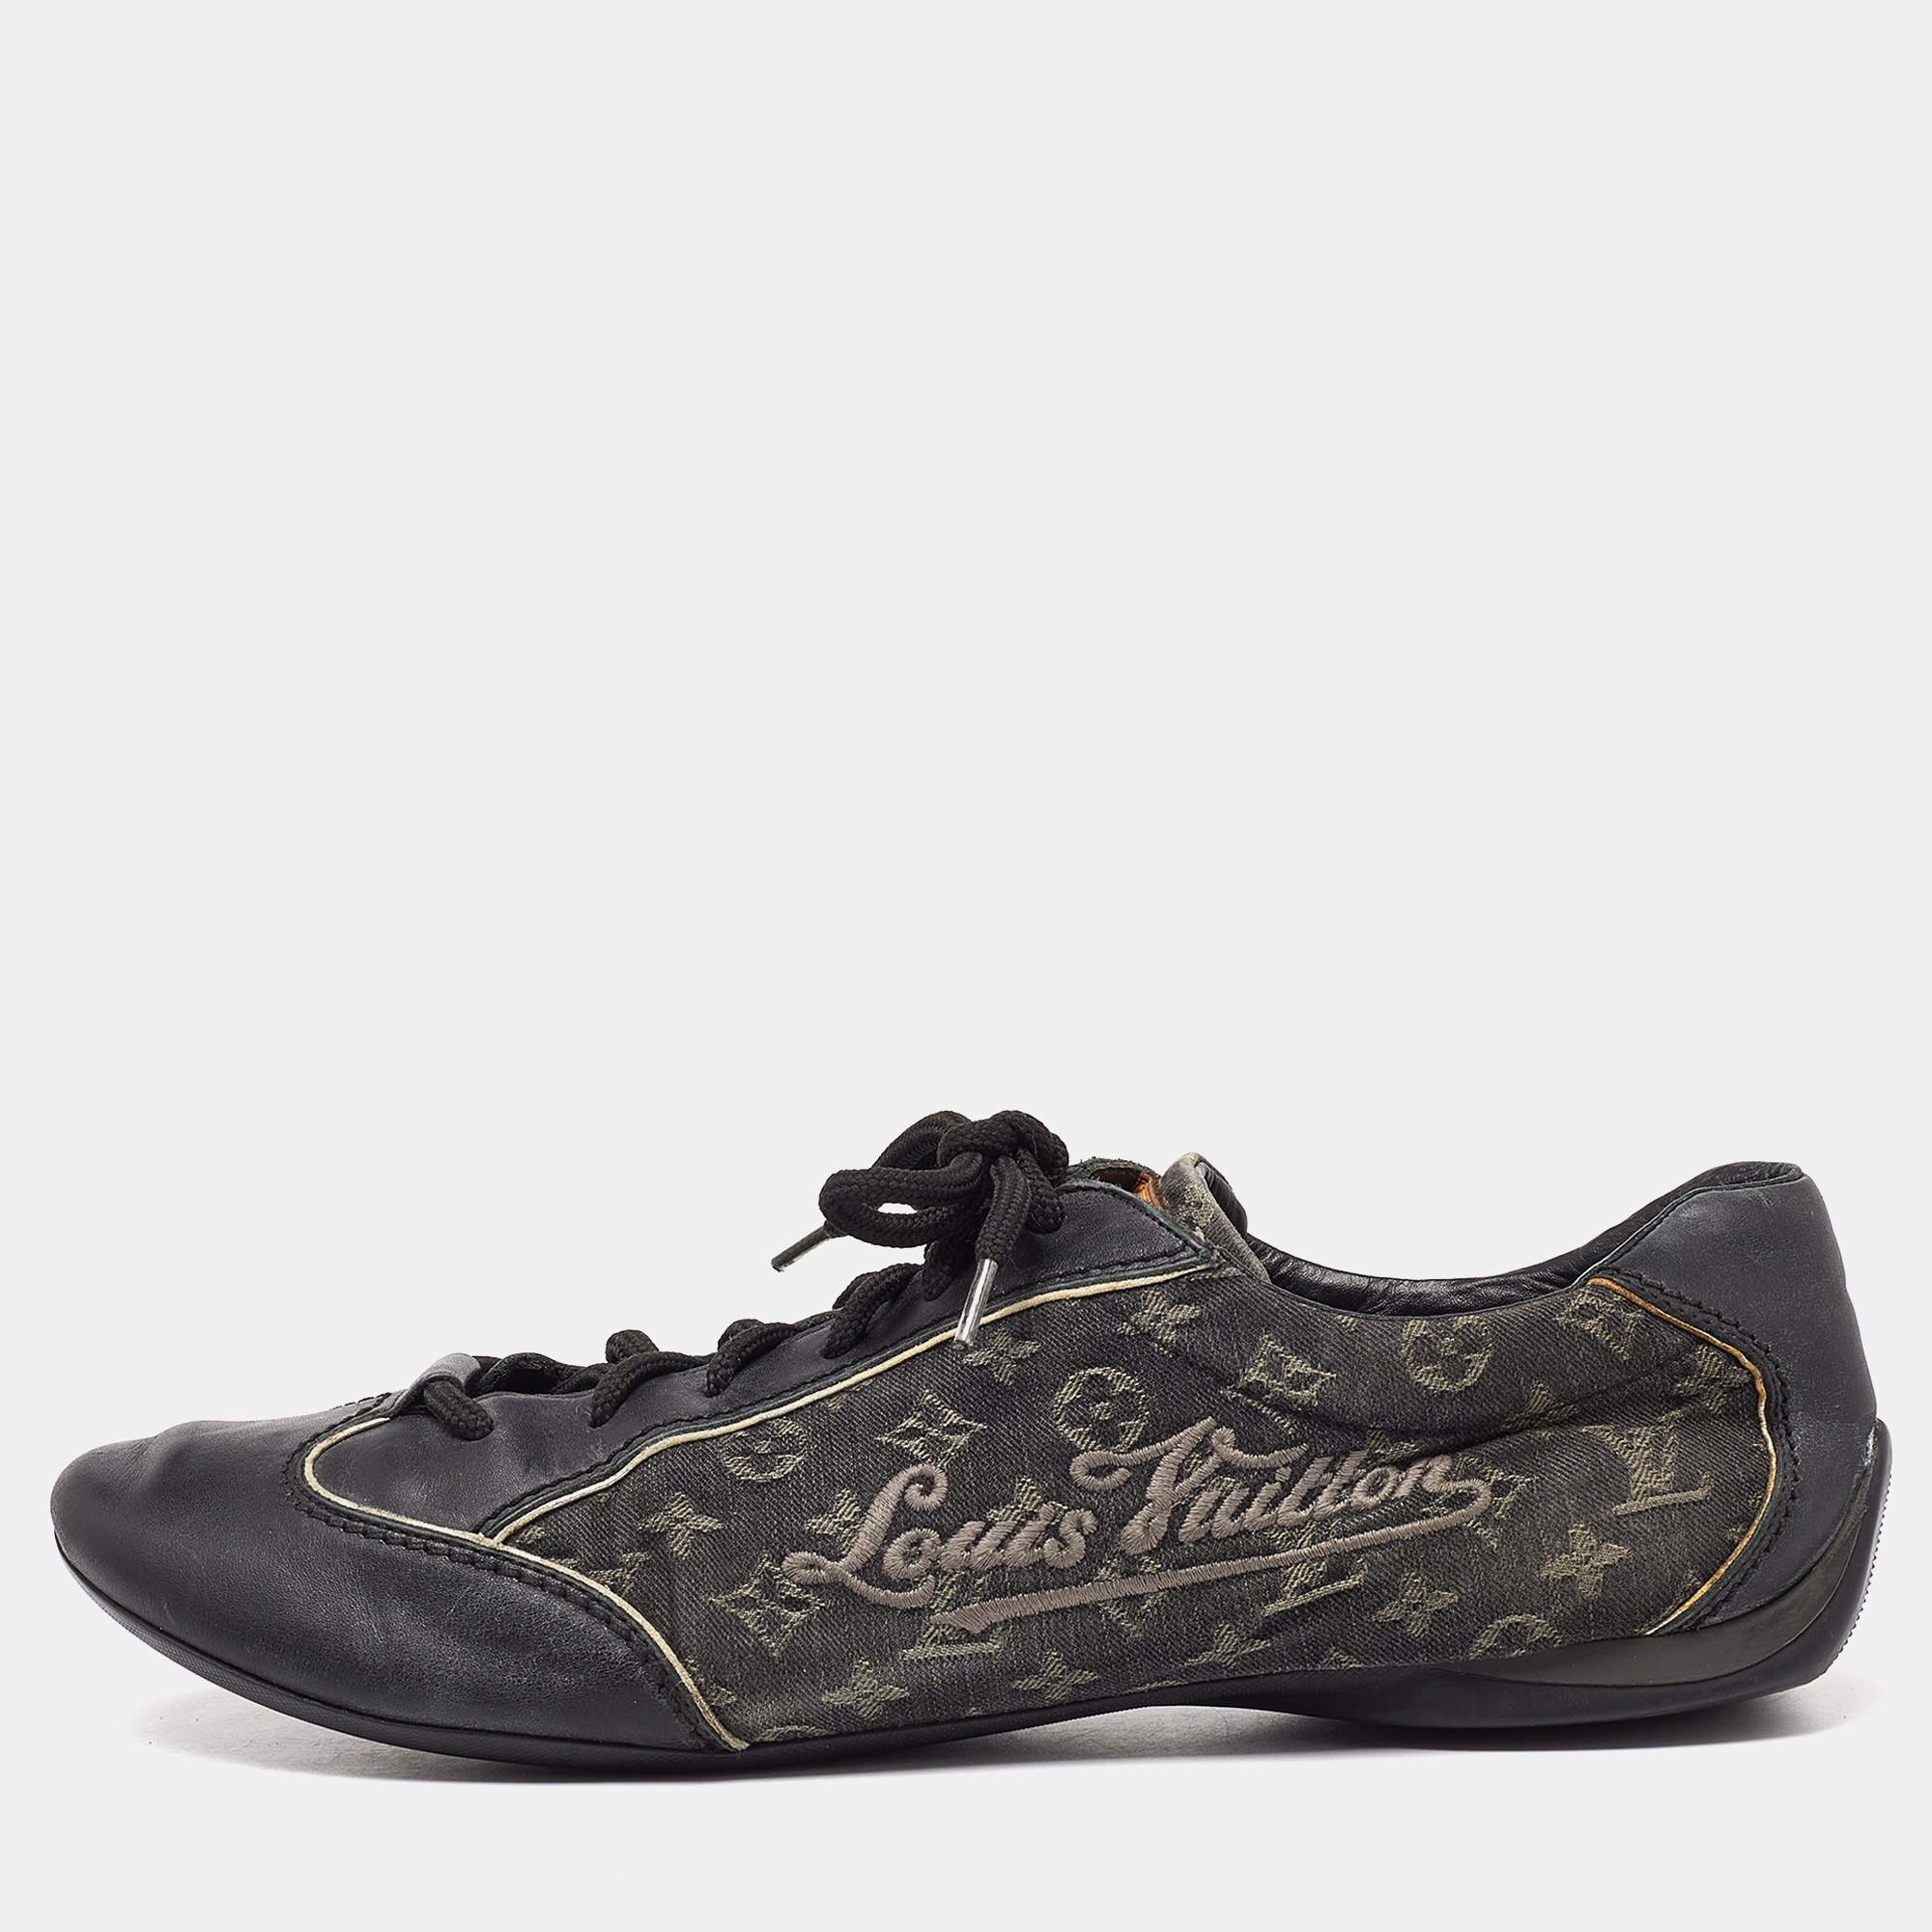 Louis Vuitton is all set to confirm you work out in style with this classy and stunning pair of sneakers. Crafted from leather and Monogram canvas they feature easy lace up details and profiles leather lined insoles along with brand labeling on the tongues.